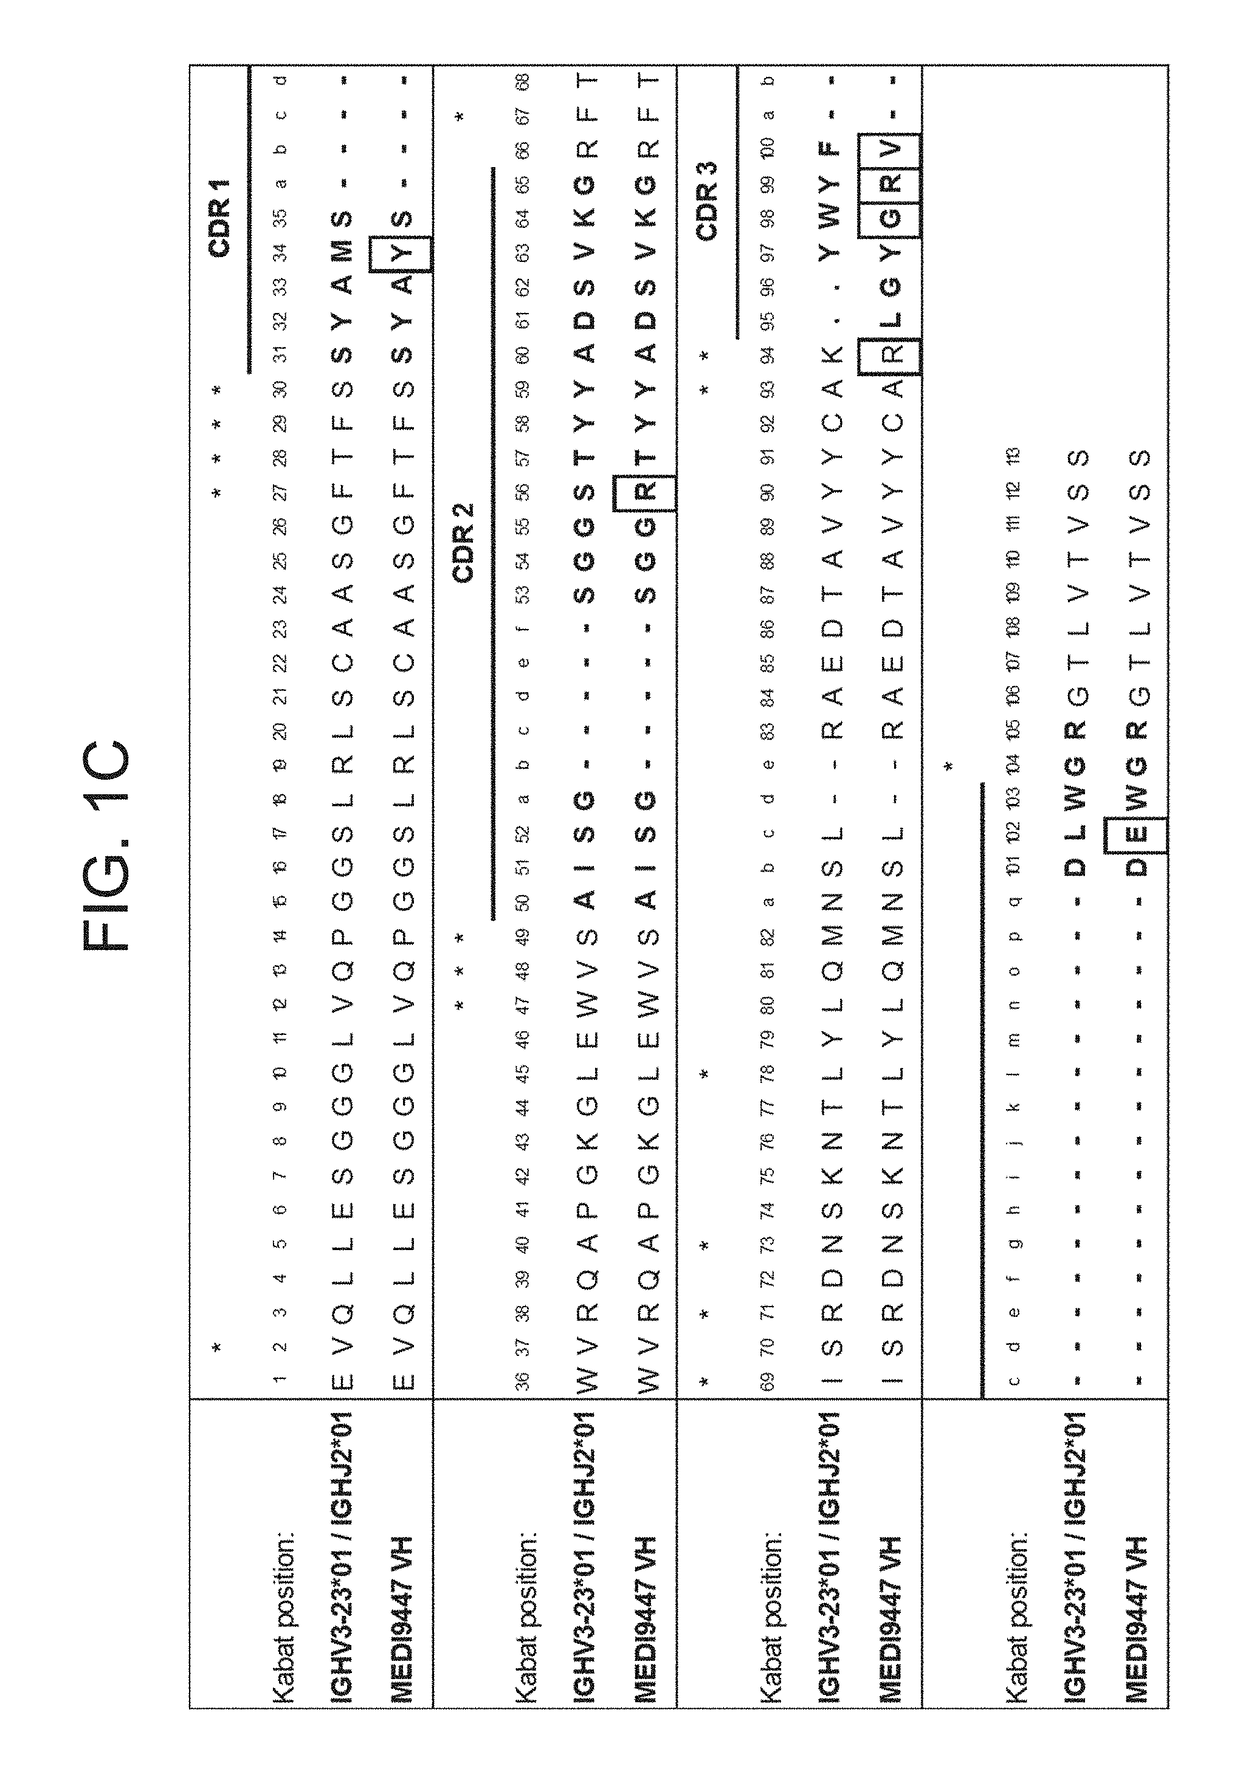 Binding molecules specific for CD73 and uses thereof